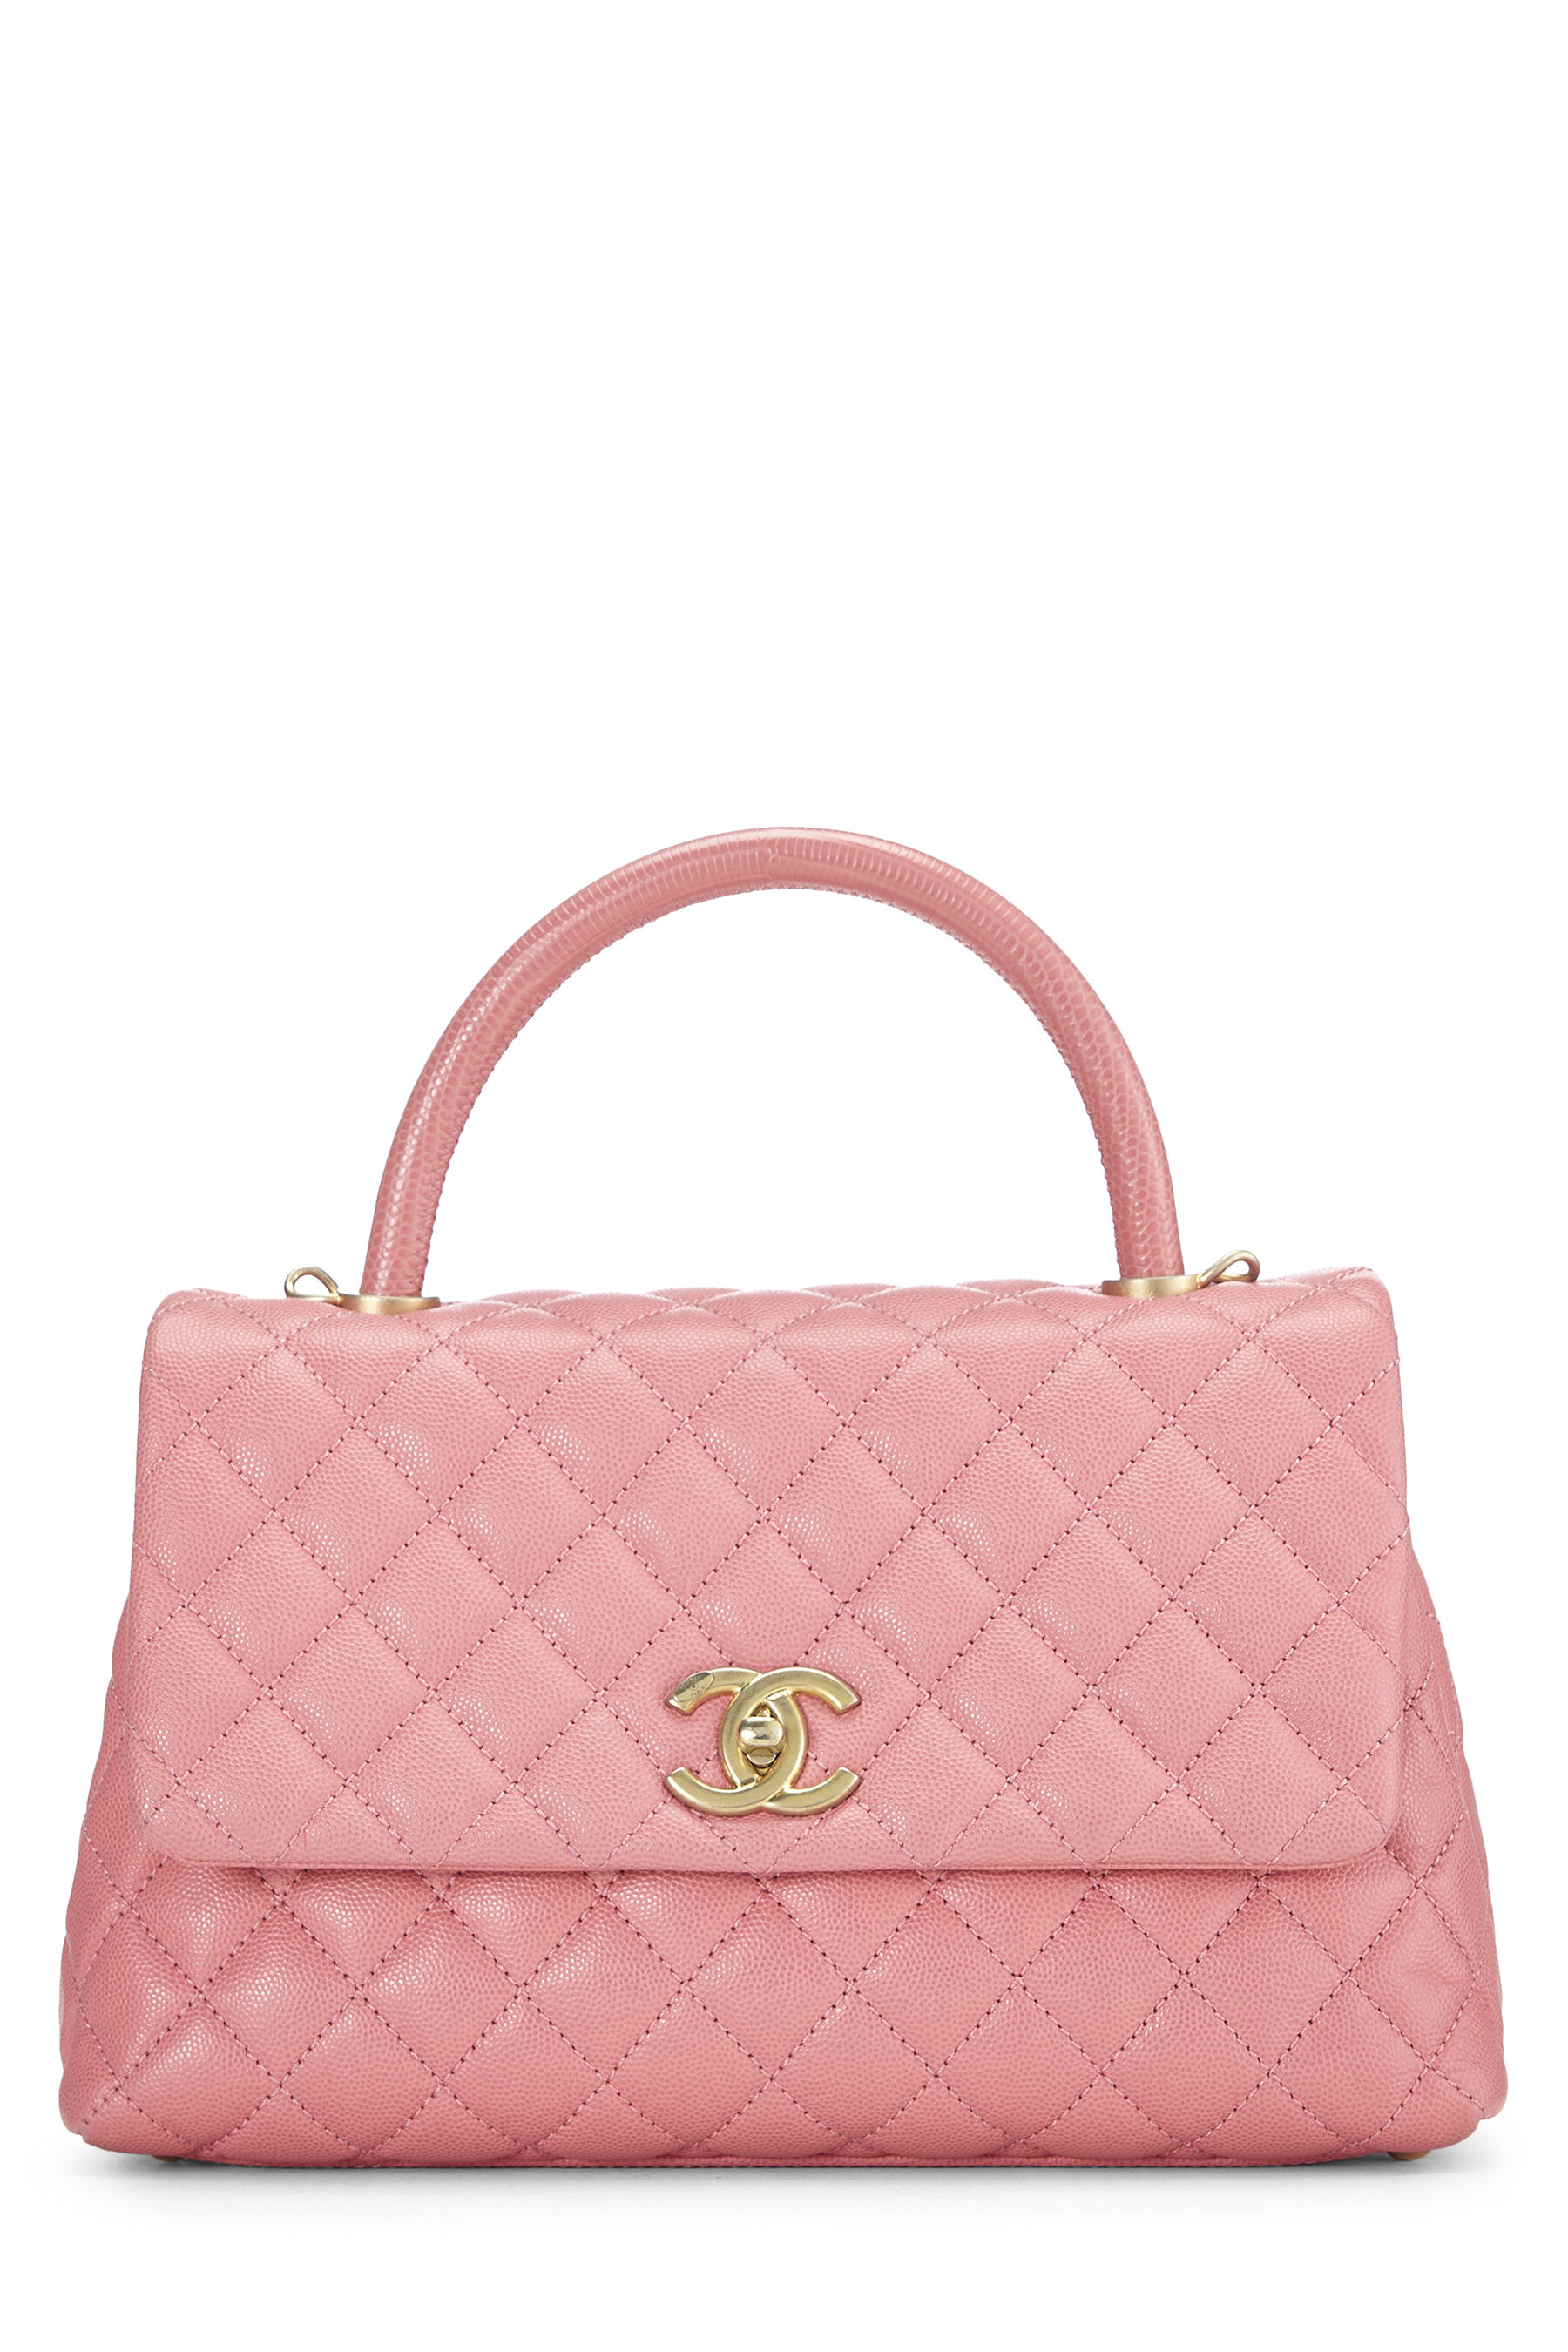 CHANEL Caviar Quilted Medium Coco Handle Flap Light Pink 462237